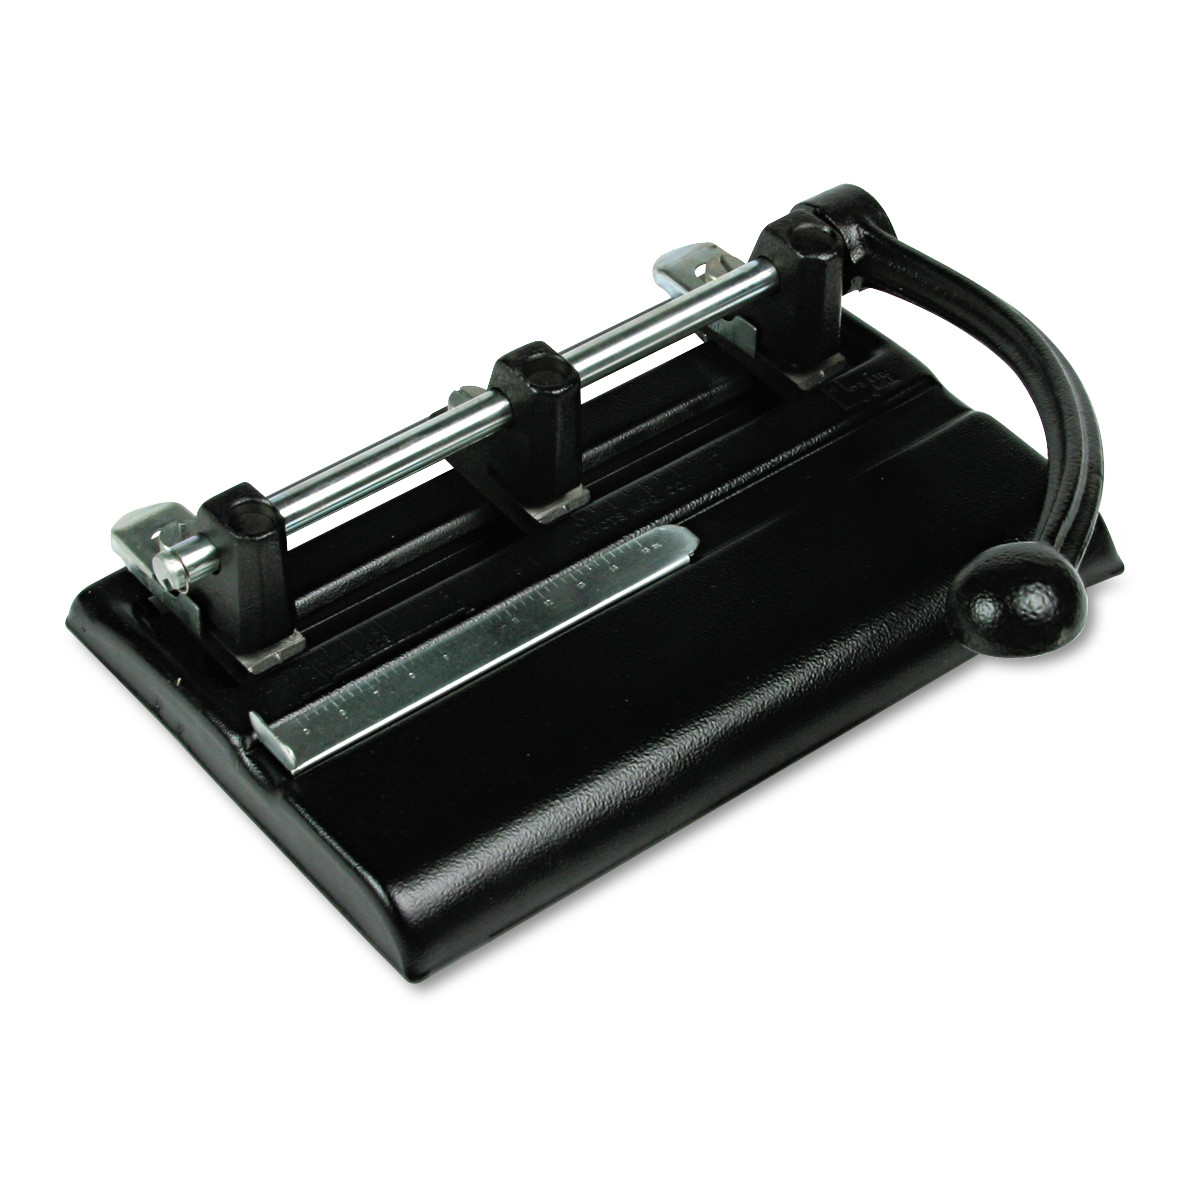 Master Products Power Handle 2/3-hole Paper Punch - 3 Punch Head(s) - 40 Sheet of 20lb Paper - 13/32" Punch Size - 10.9" x 7.5" 